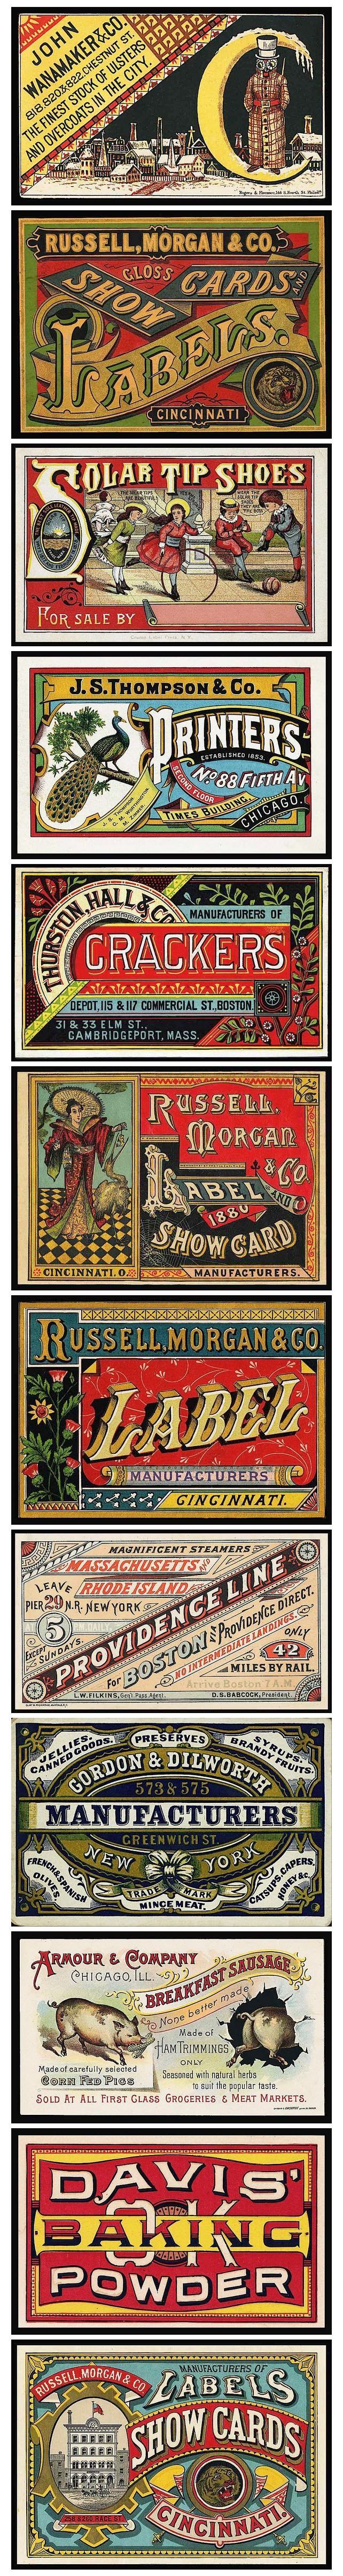 Business Cards straight out of the Victorian Era via @_patrickwelker